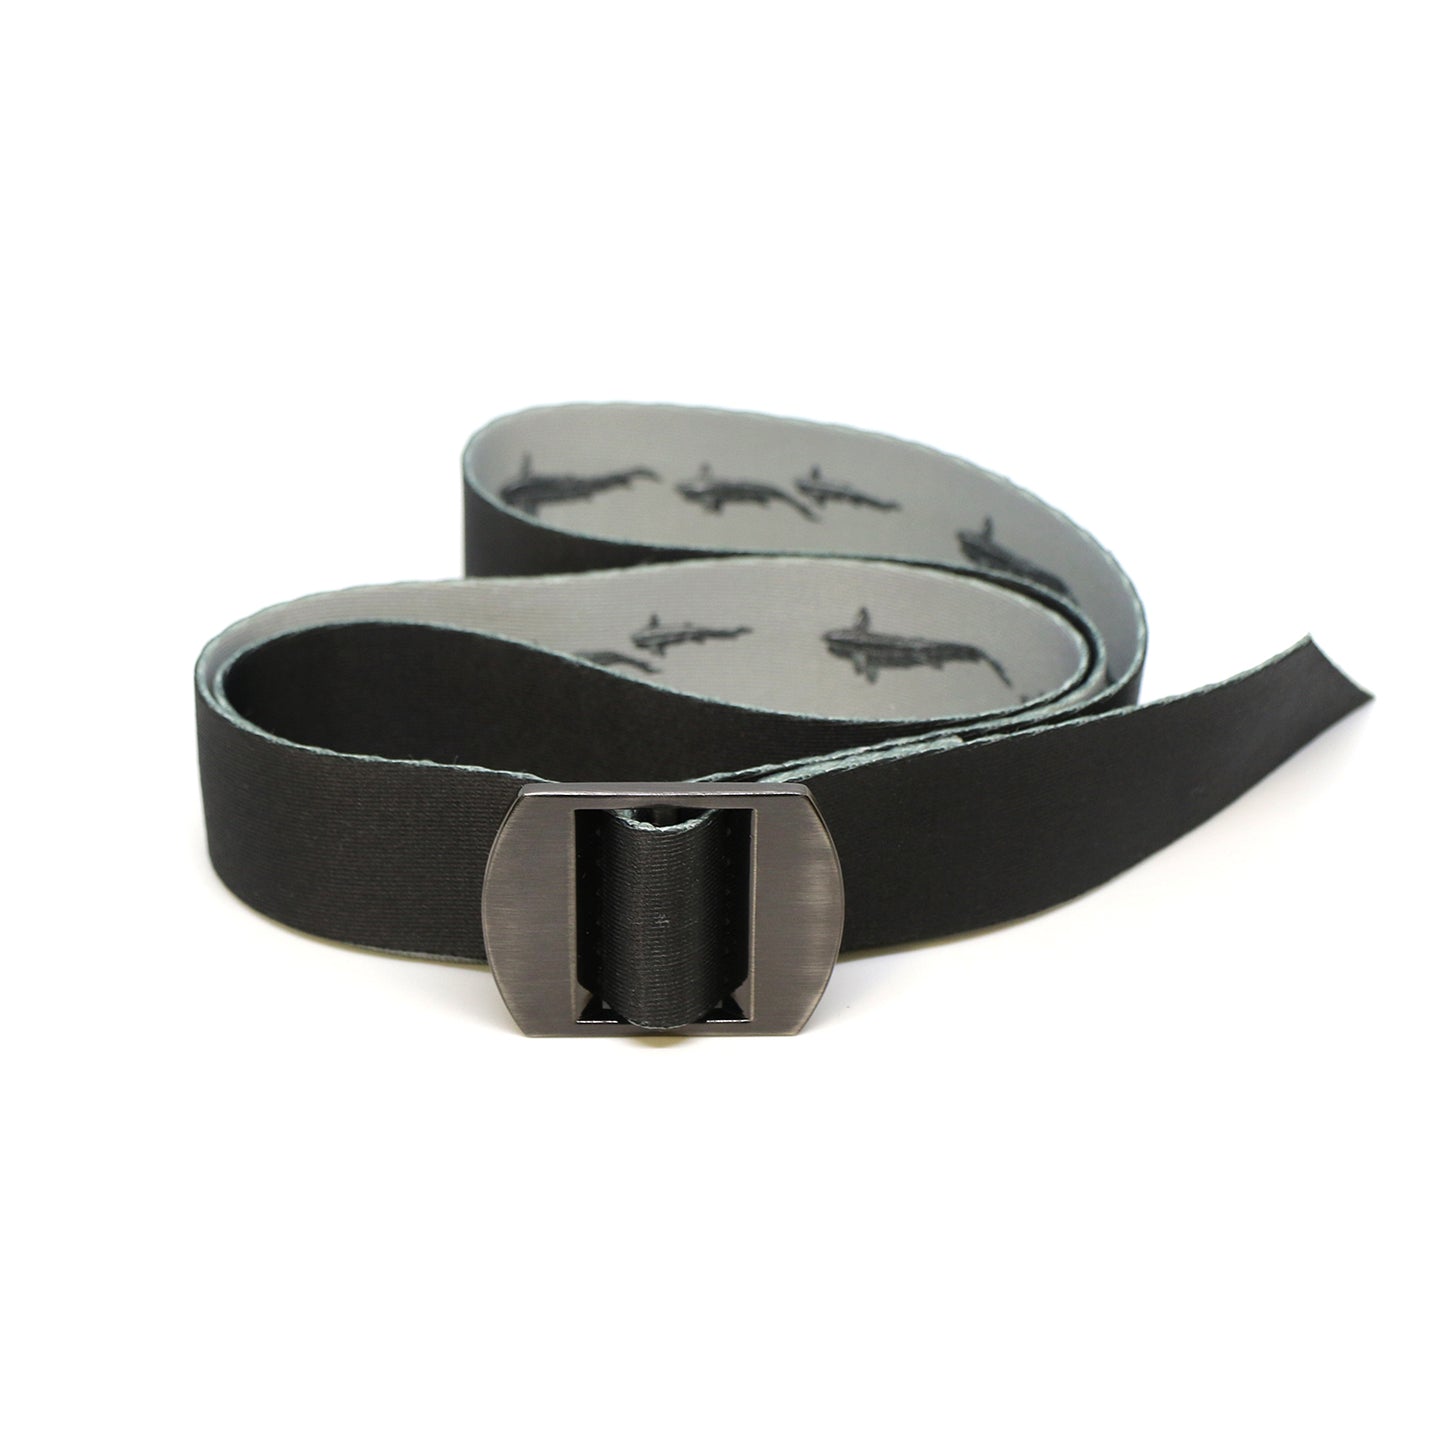 A nylon belt with a metal front buckle has a swimming trout on a gray background print, showing the black reverse side of the belt